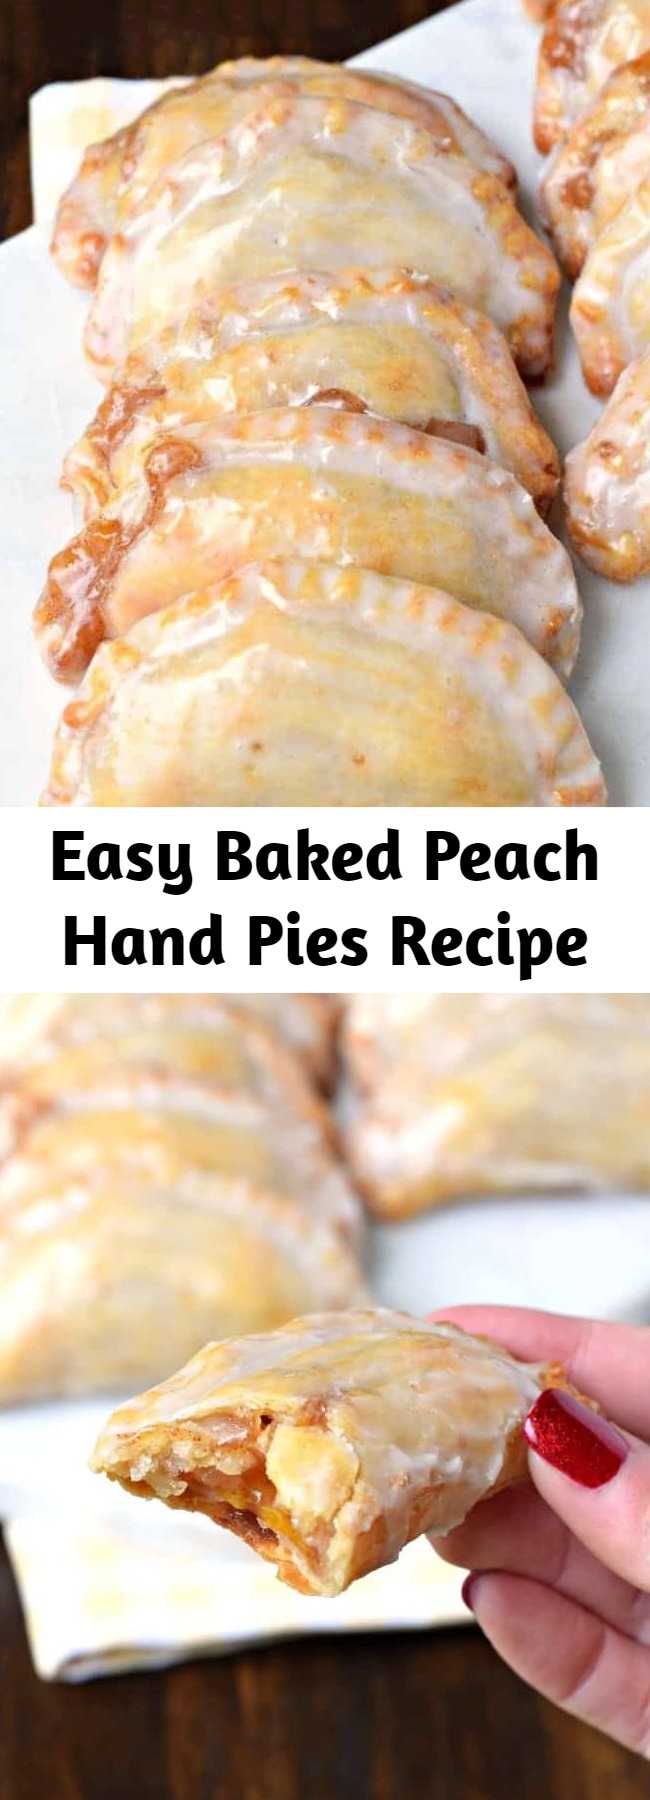 Easy Baked Peach Hand Pies Recipe - Dessert is ready in 30 minutes with these Glazed Peach Hand Pies! The flaky crust and spicy cinnamon filling are the perfect combo in a hand pie, plus they're baked not fried! #handpies #piefilling #peach #dessert